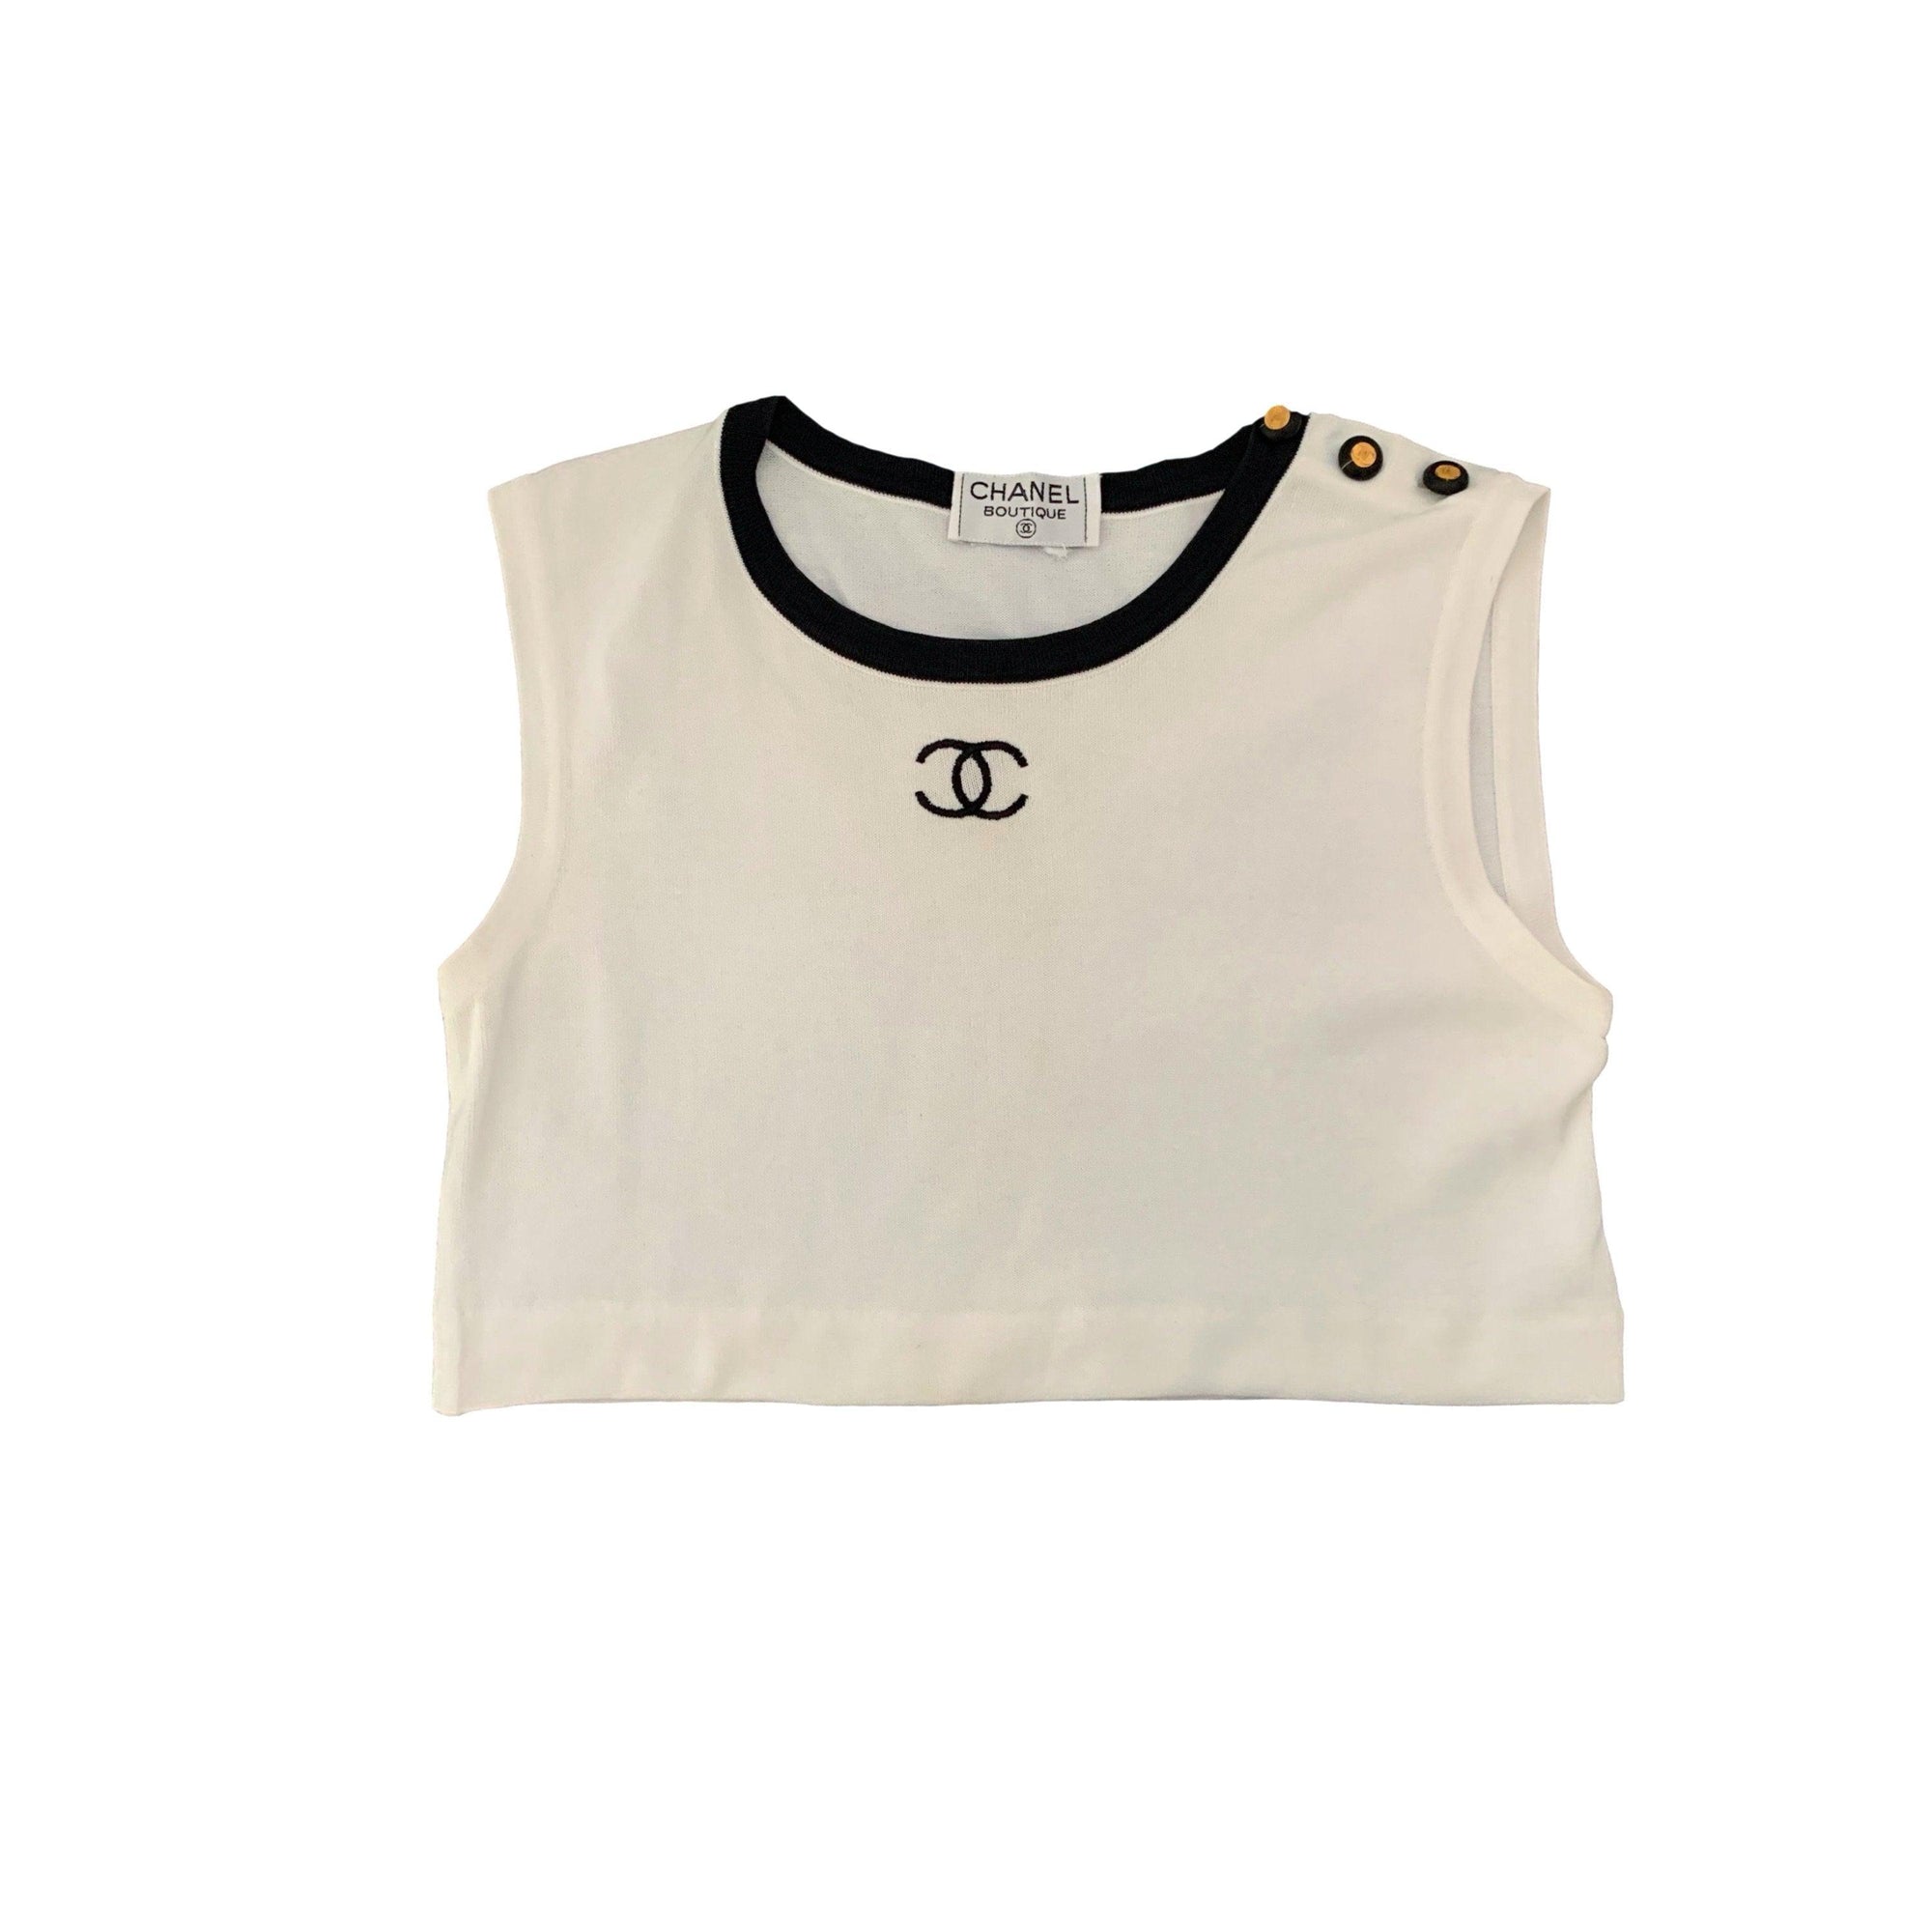 CHANEL TOP